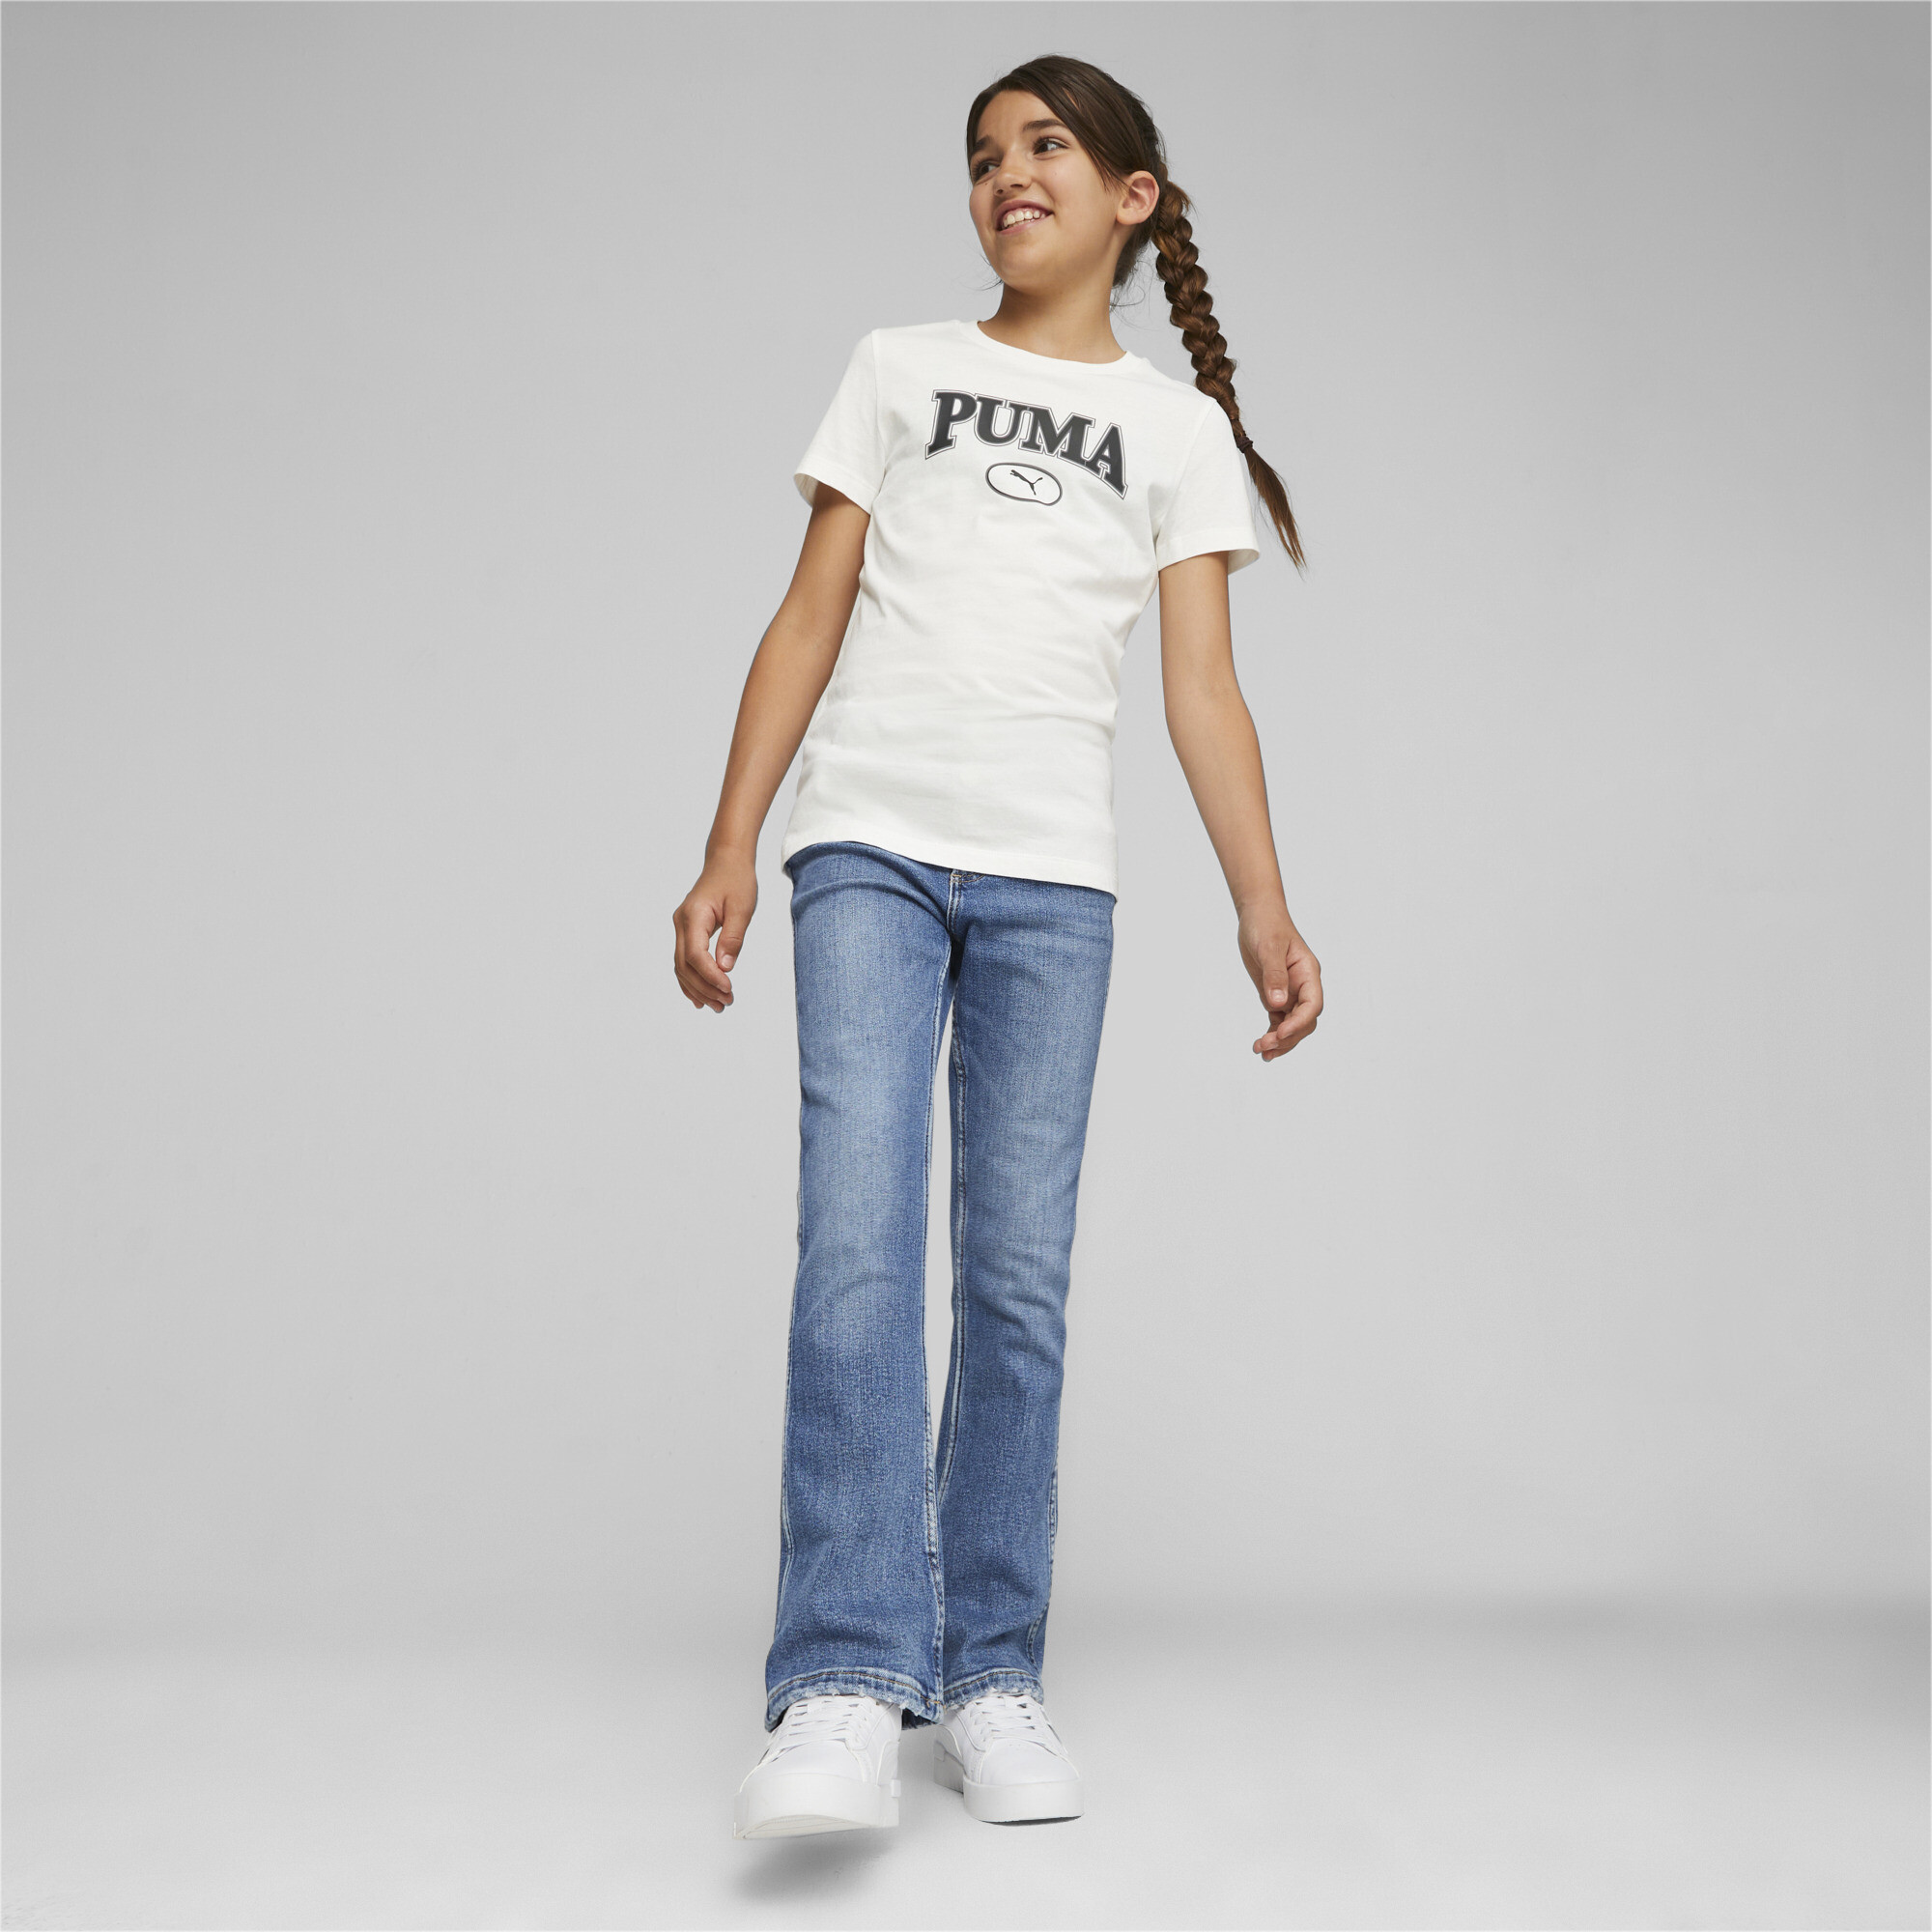 PUMA SQUAD Graphic T-Shirt In White, Size 7-8 Youth